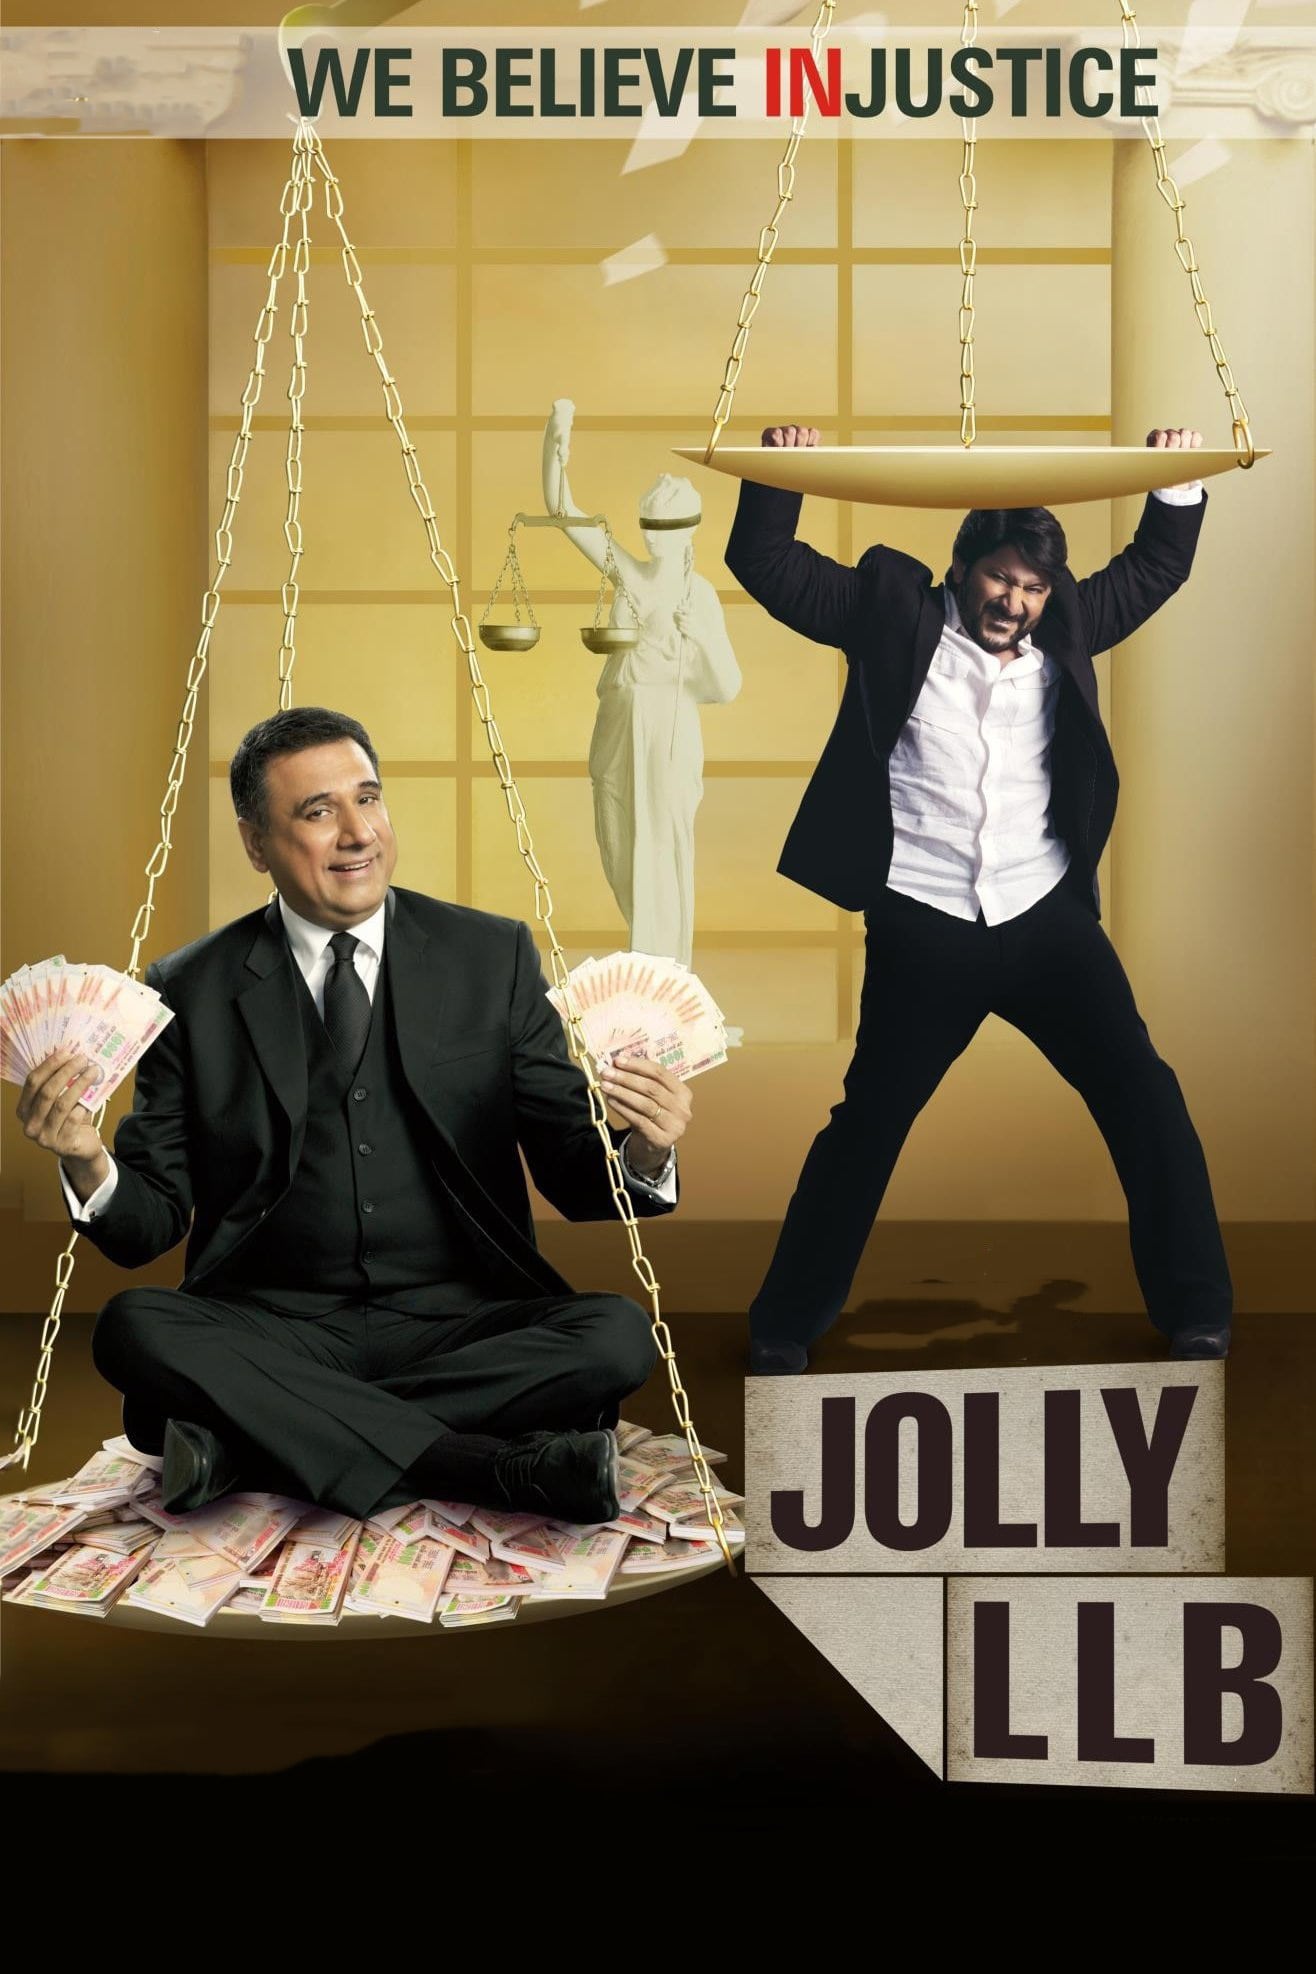 The State vs. Jolly LL.B 2